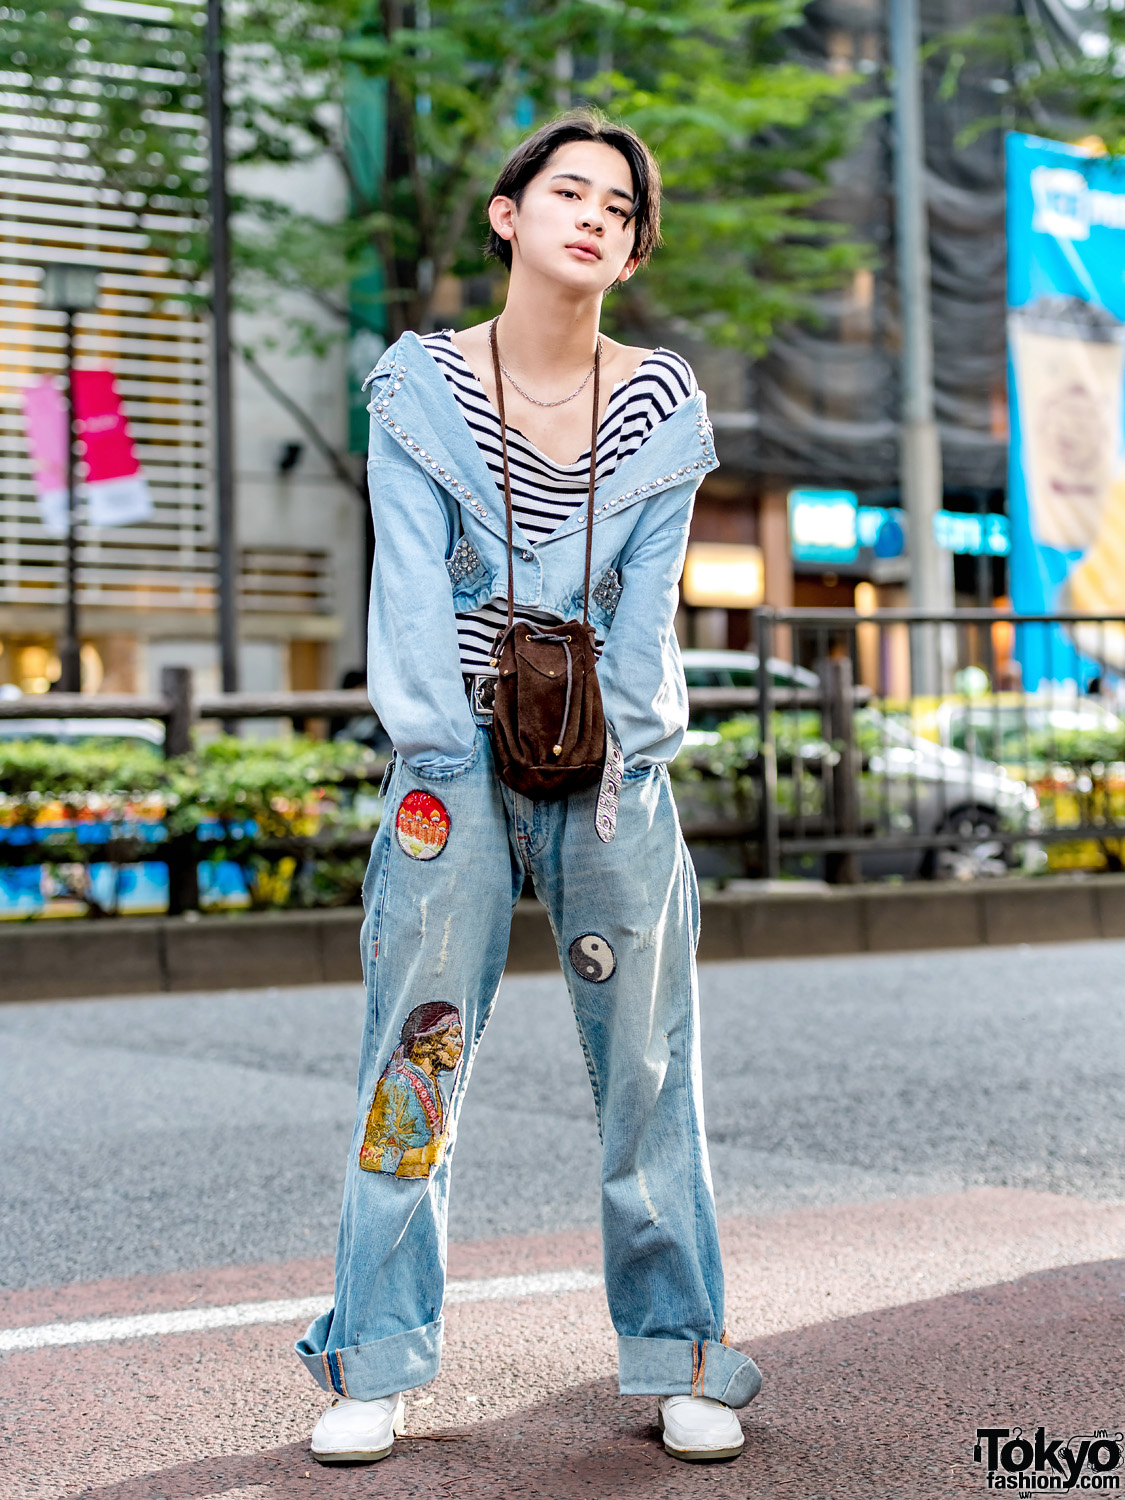 Find Yuudai on Instagram for more of his Japanese street style.